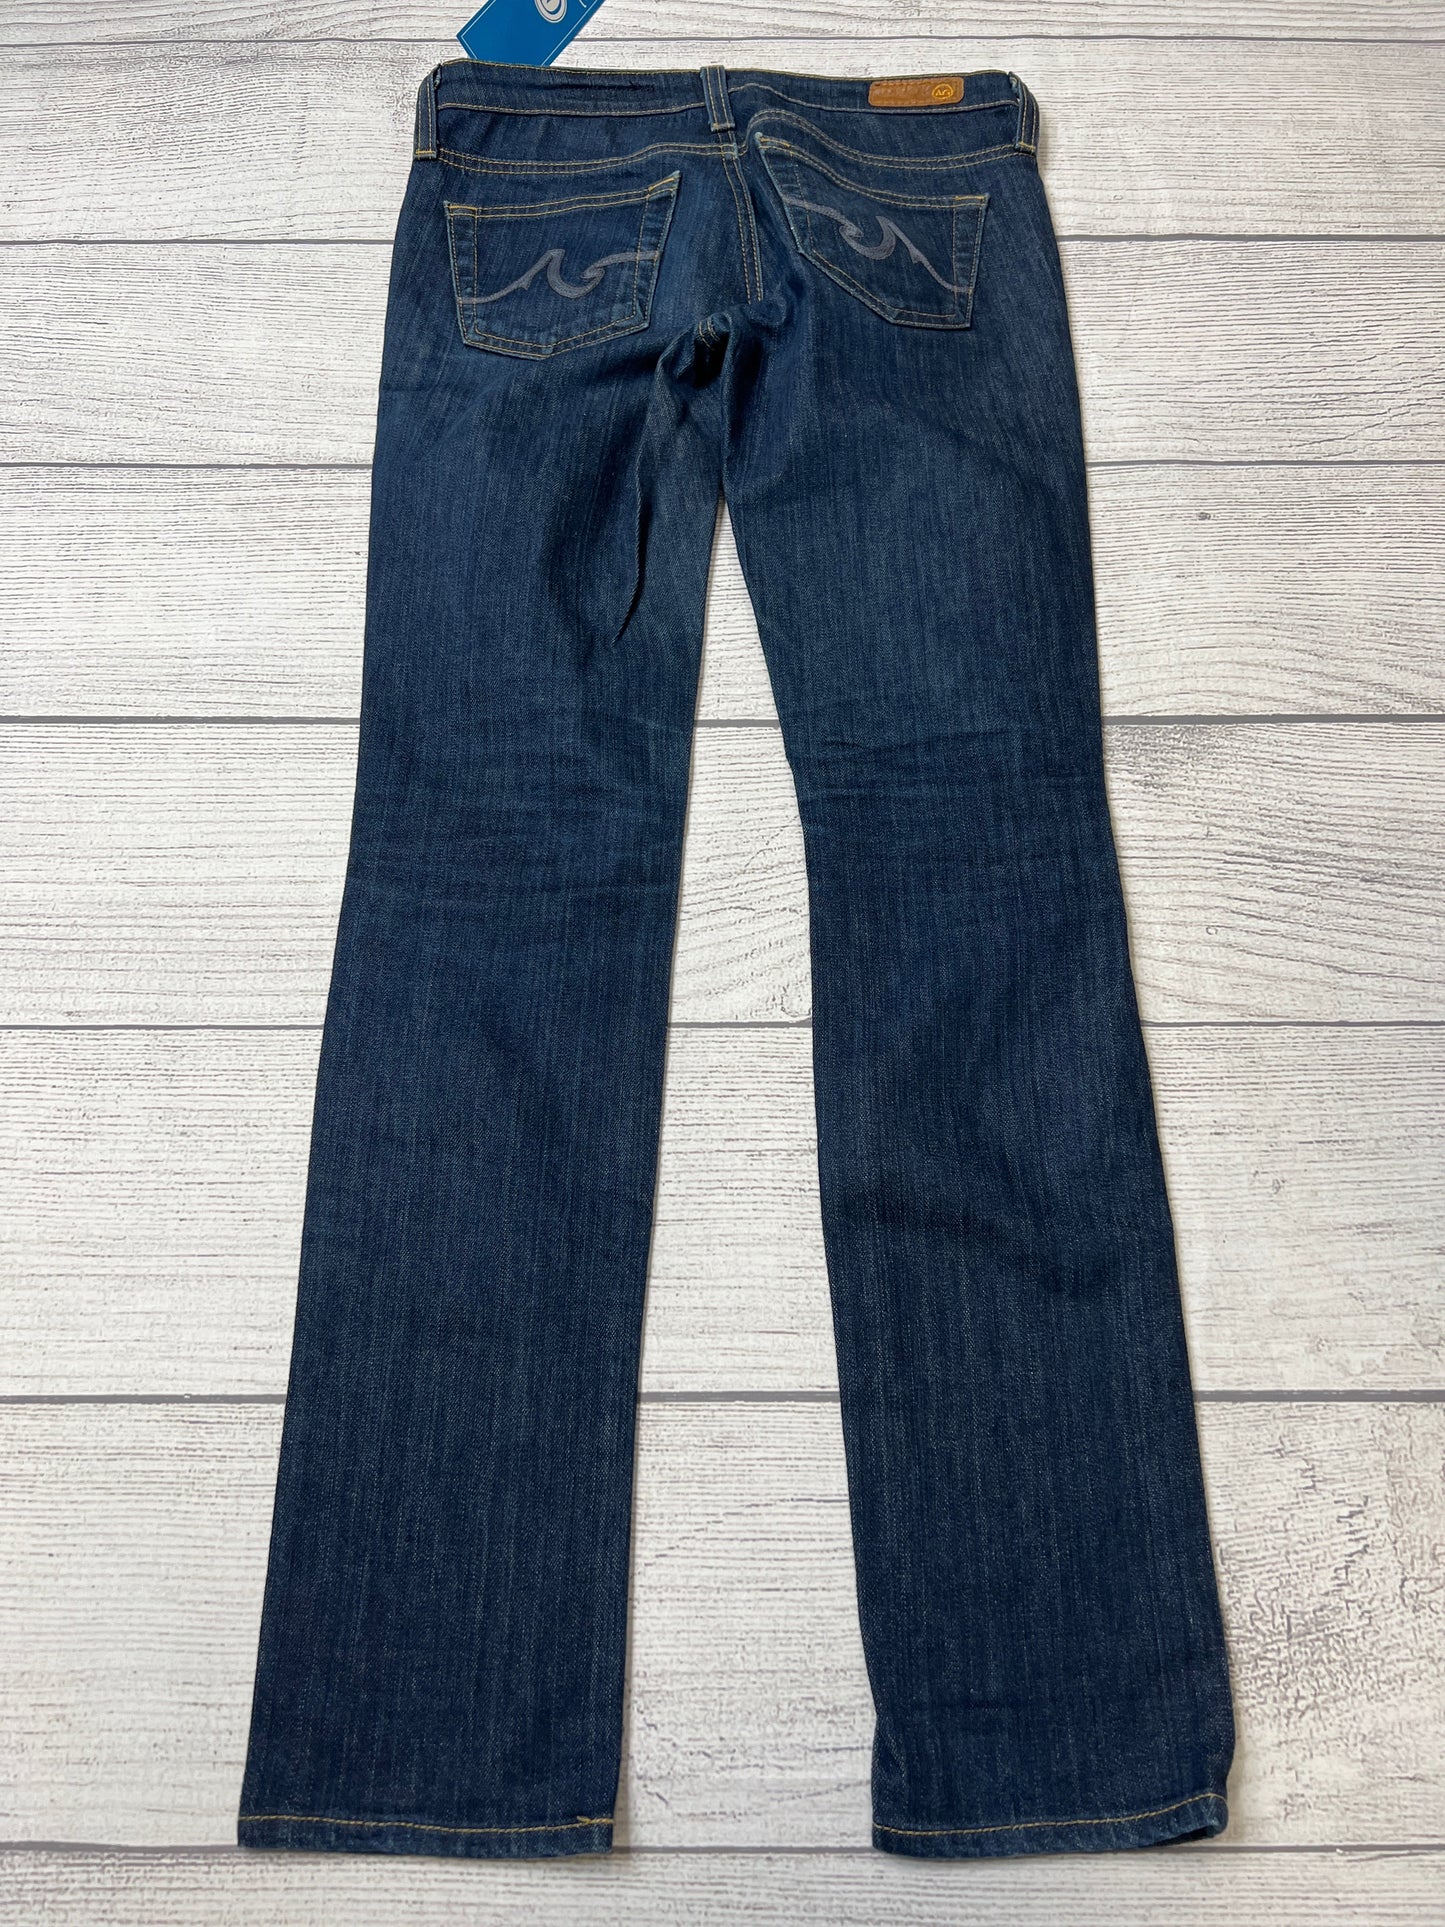 Jeans Designer By Adriano Goldschmied  Size: 0